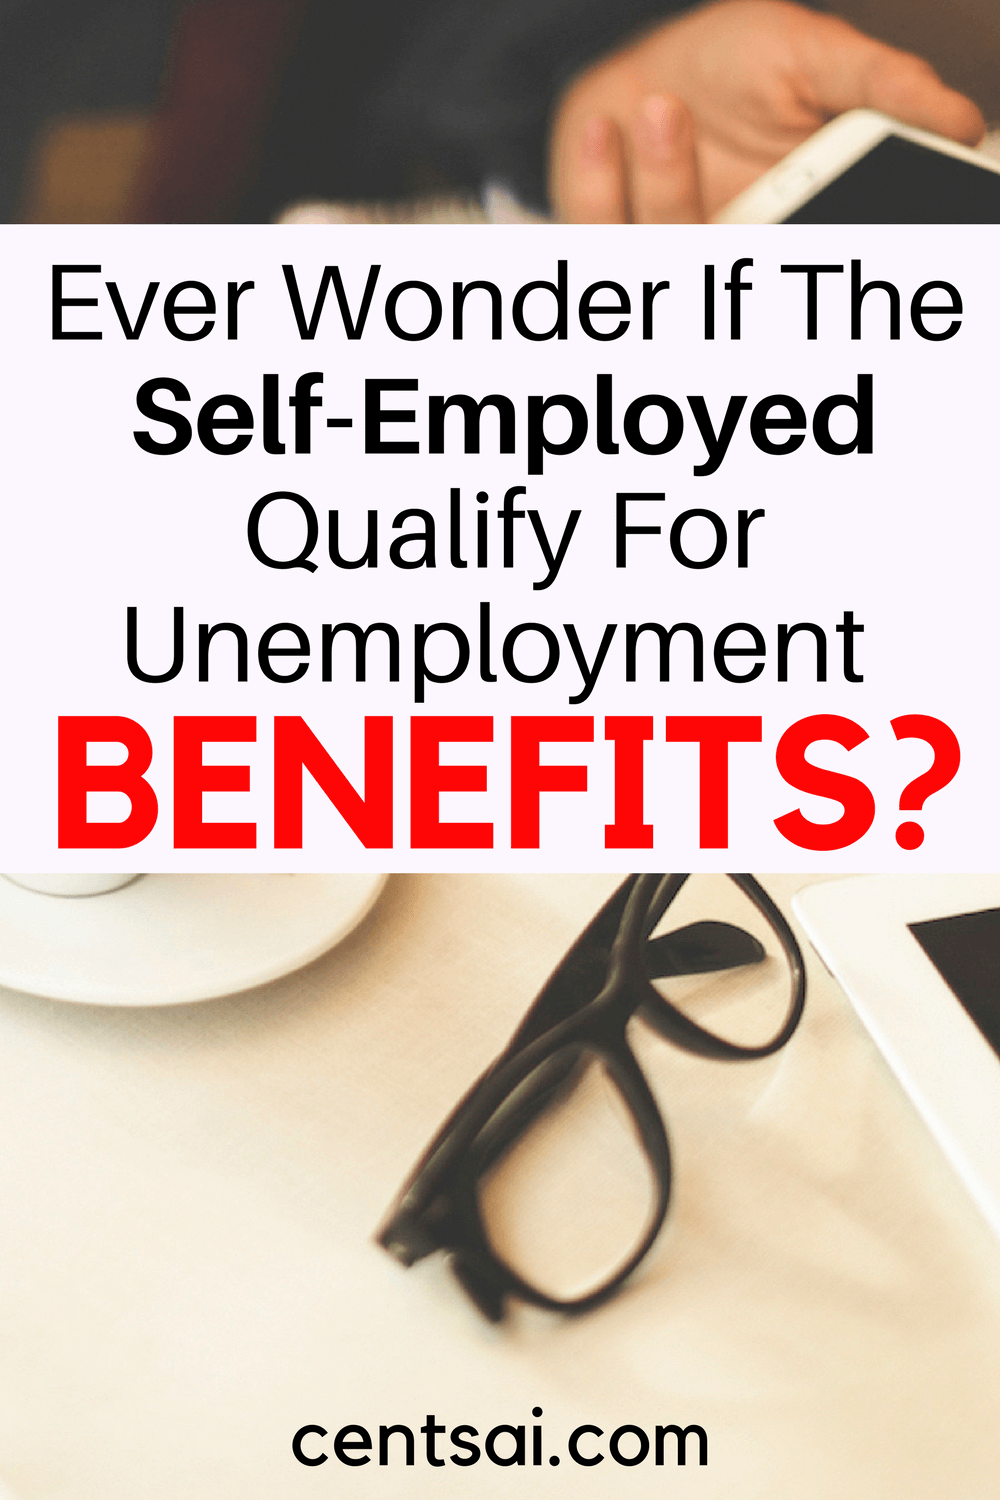 Ever Wonder If The Self-Employed Qualify For Unemployment Benefits? Even if you can't get employment insurance benefits, there are ways you can protect yourself when you're self-employed.